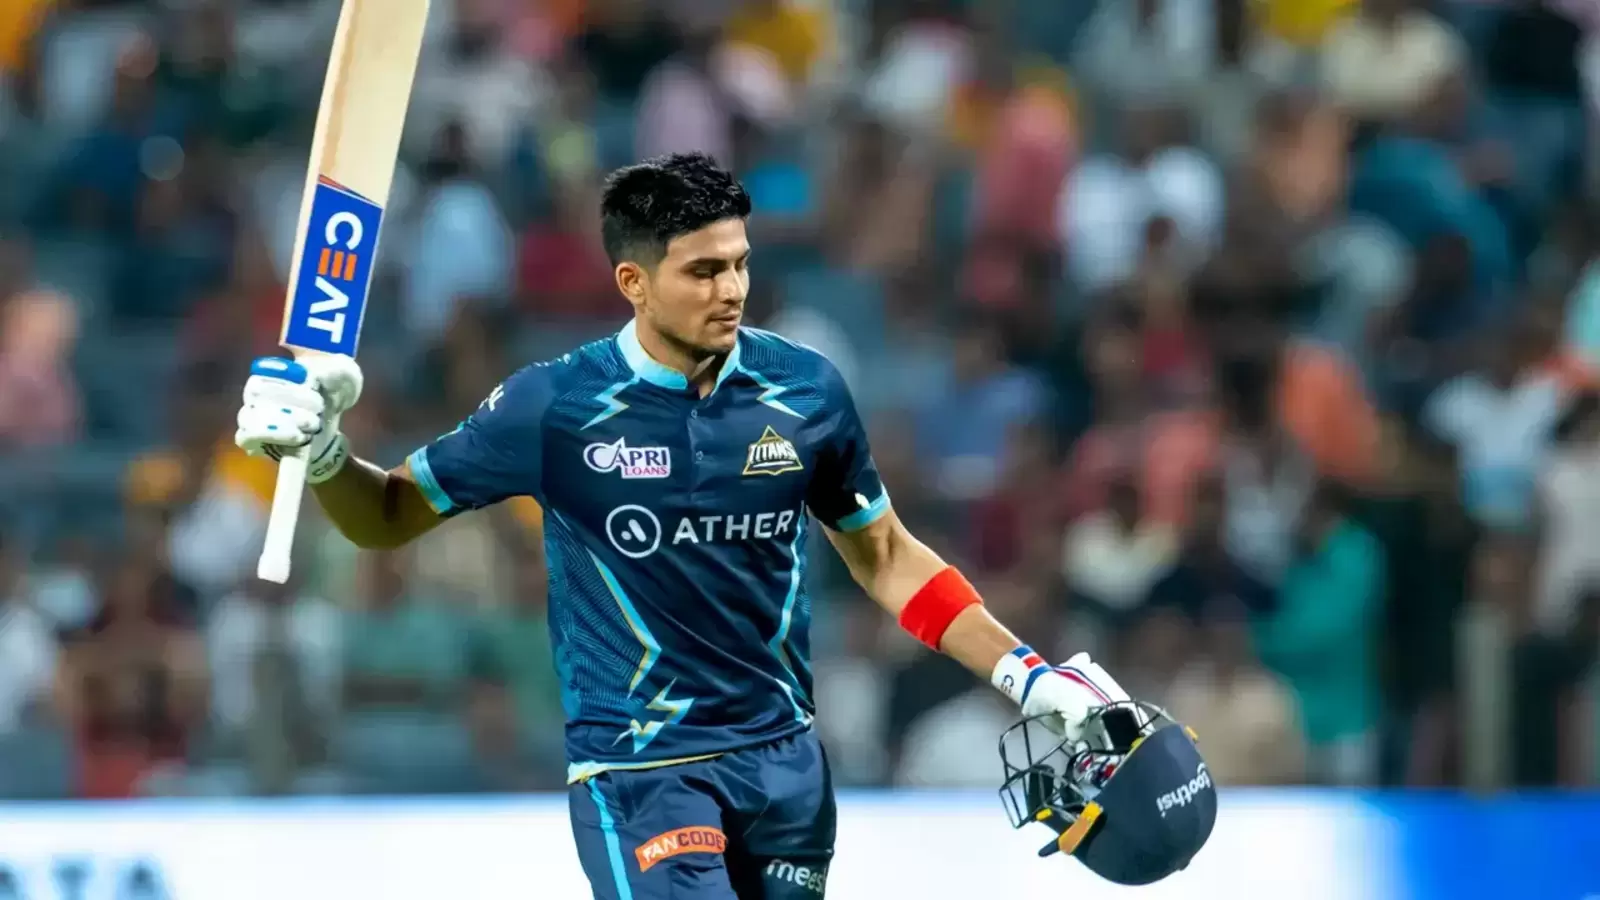 gujarat-titans-leave-fans-confused-with-cryptic-tweet-on-shubman-gill-s-future-all-the-best-for-your-next-endeavour